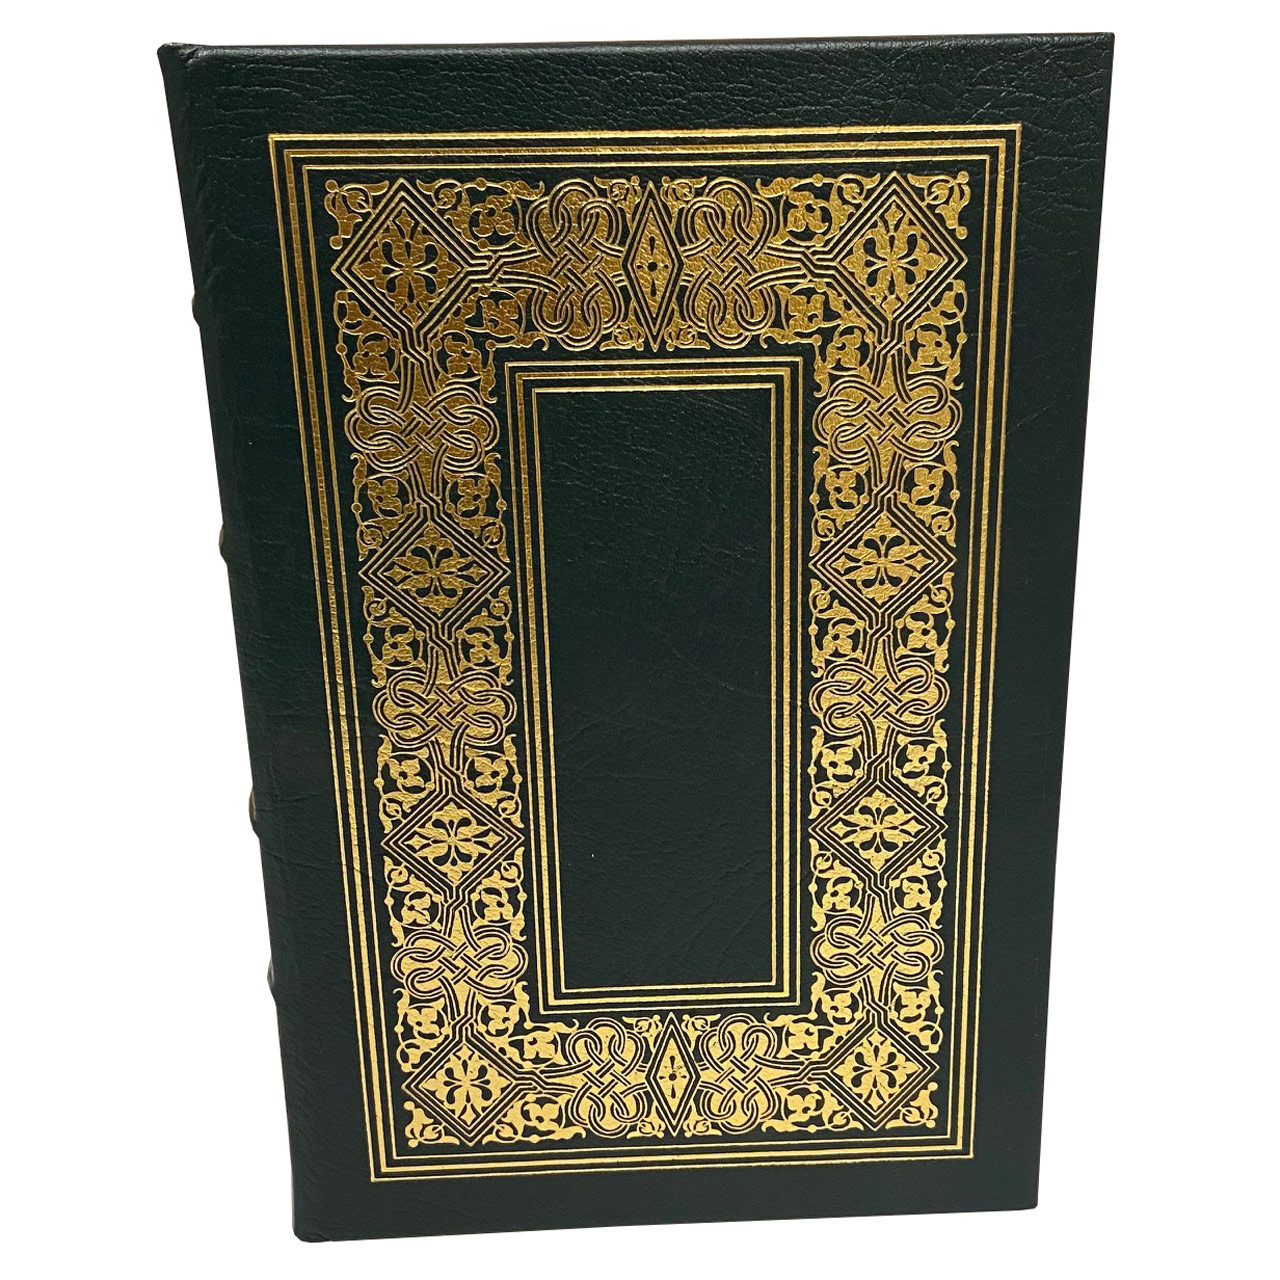 Easton Press "Climbing The Mountain: My Search for Meaning" Kirk Douglas, Signed First Edition No. 565 of 1,250  w/COA